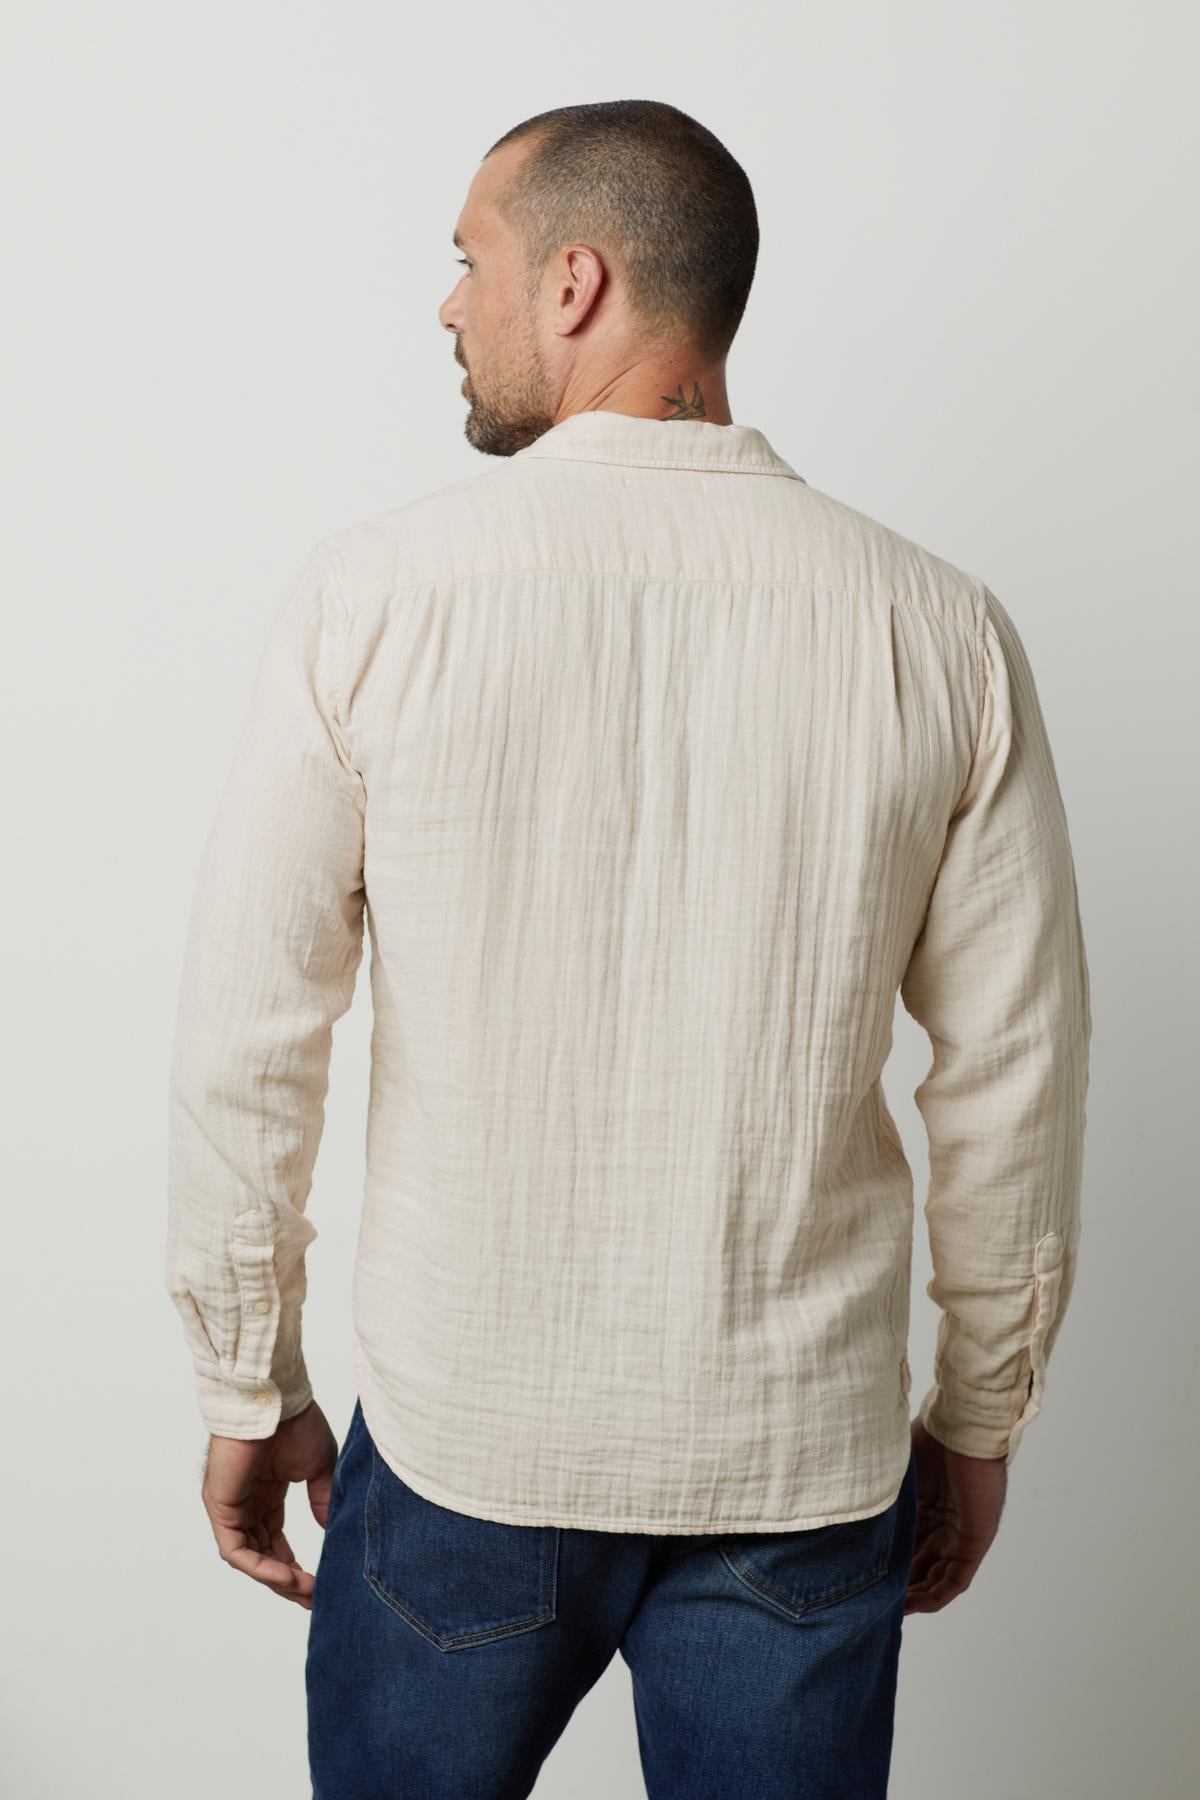   A man viewed from behind, wearing a Velvet by Graham & Spencer Elton Cotton Gauze Button-Up Shirt and blue jeans, standing against a white background. 